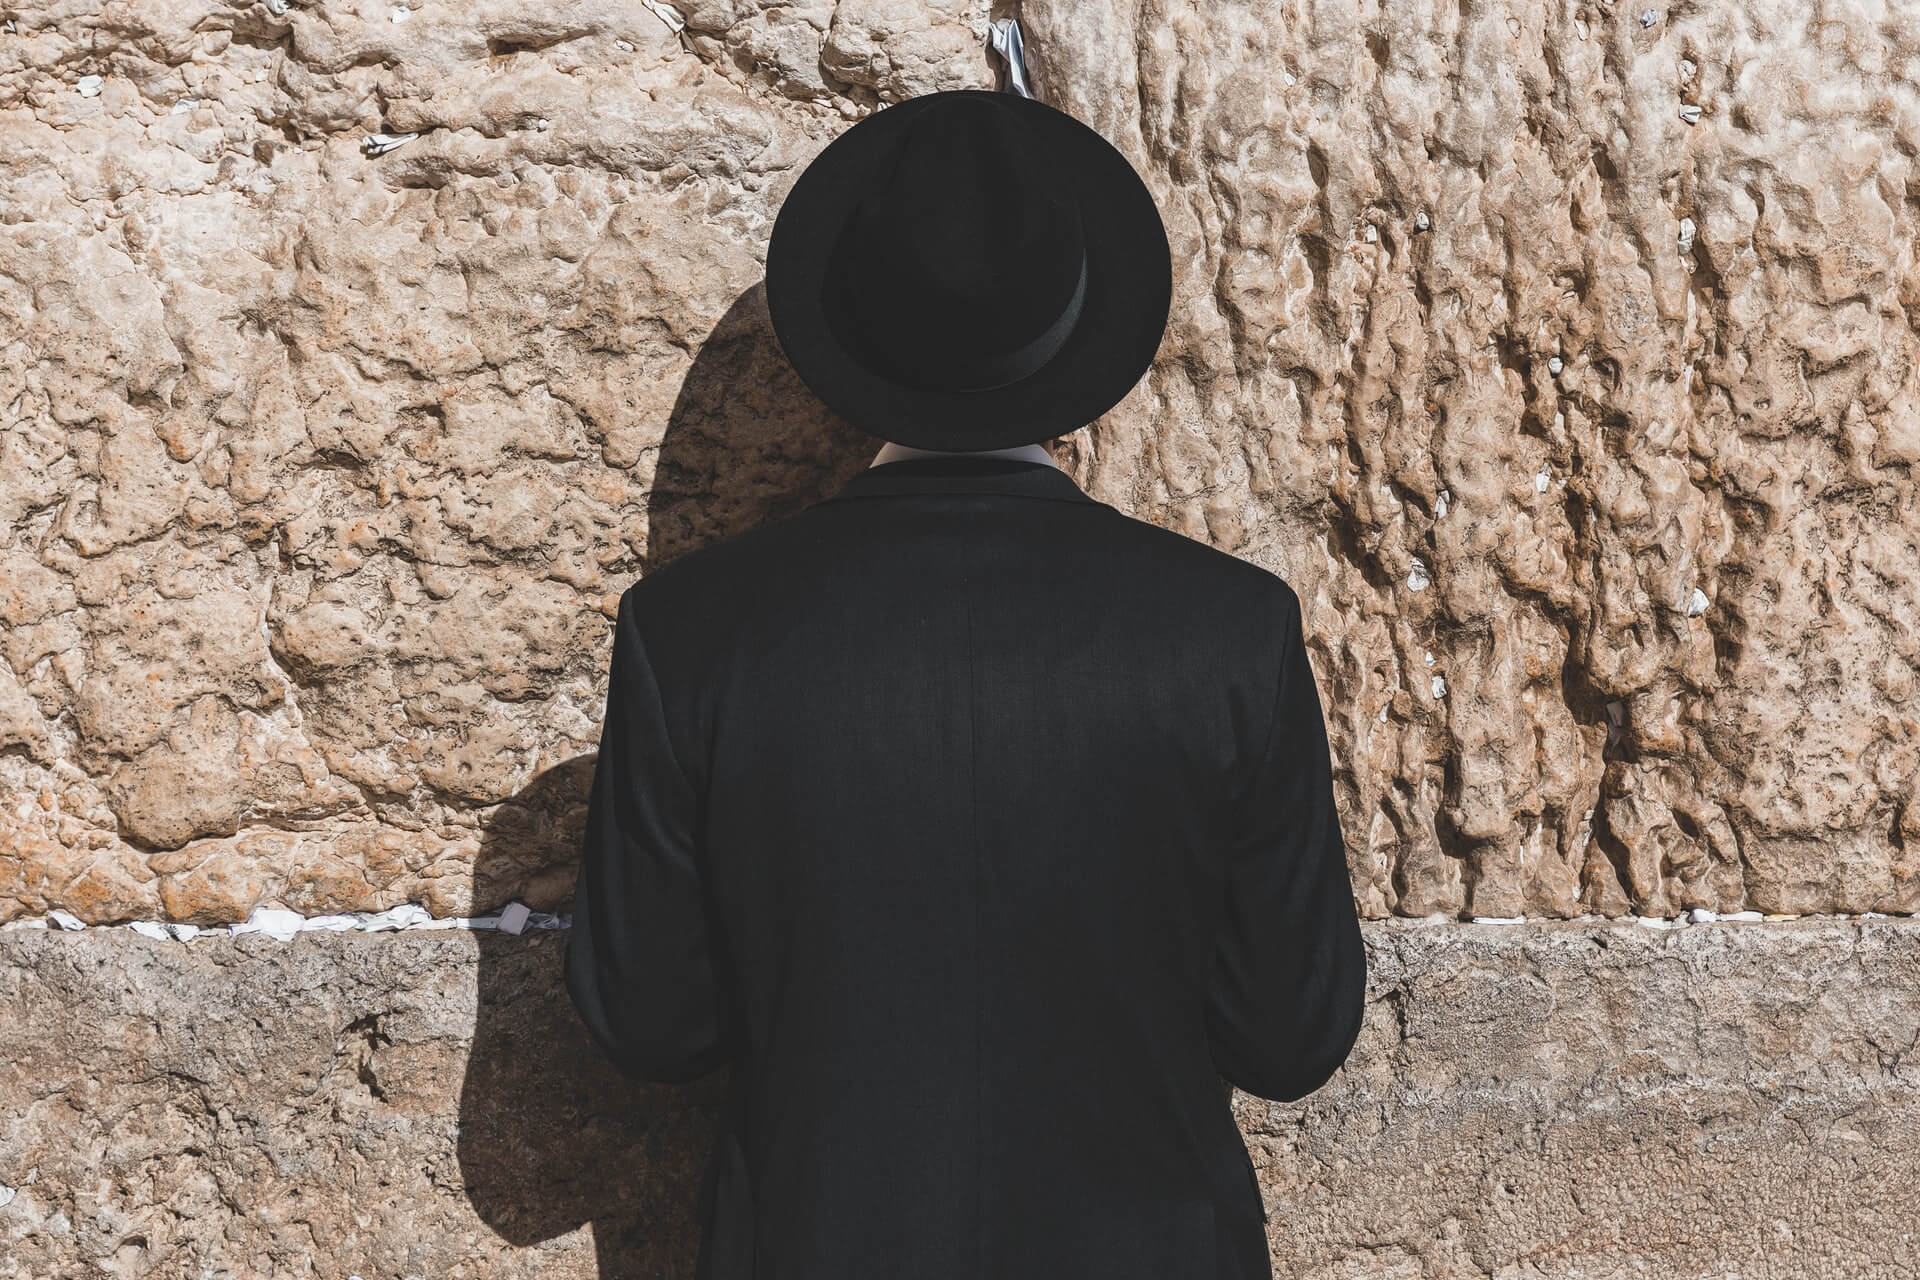 An Ultra-Orthodox Jew praying at the Western 'Wailing' Wall - top historical site in Jerusalem